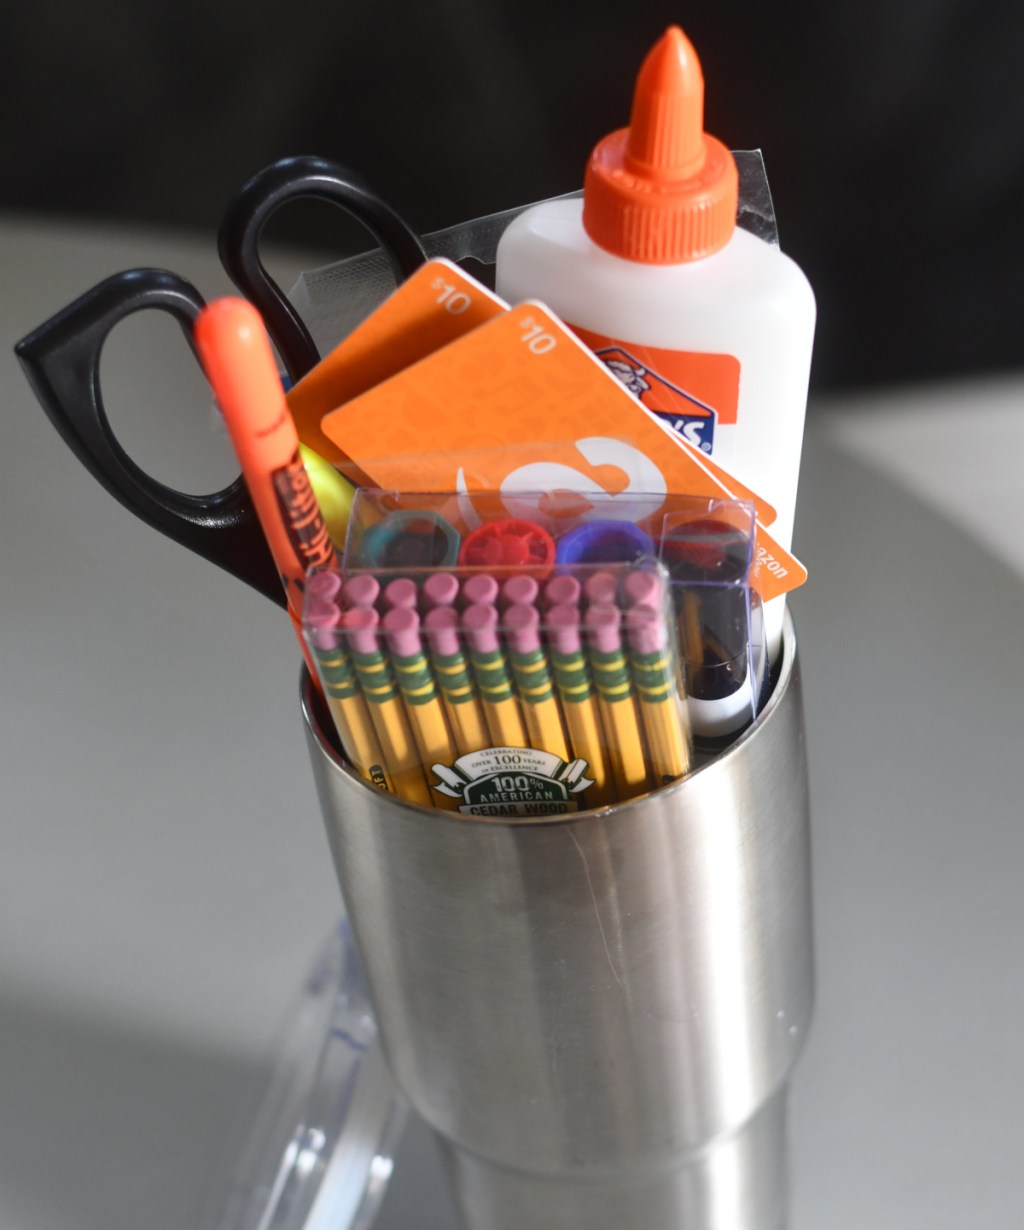 A tumbler filled with school supplies which is one of our favorite diy teacher gifts